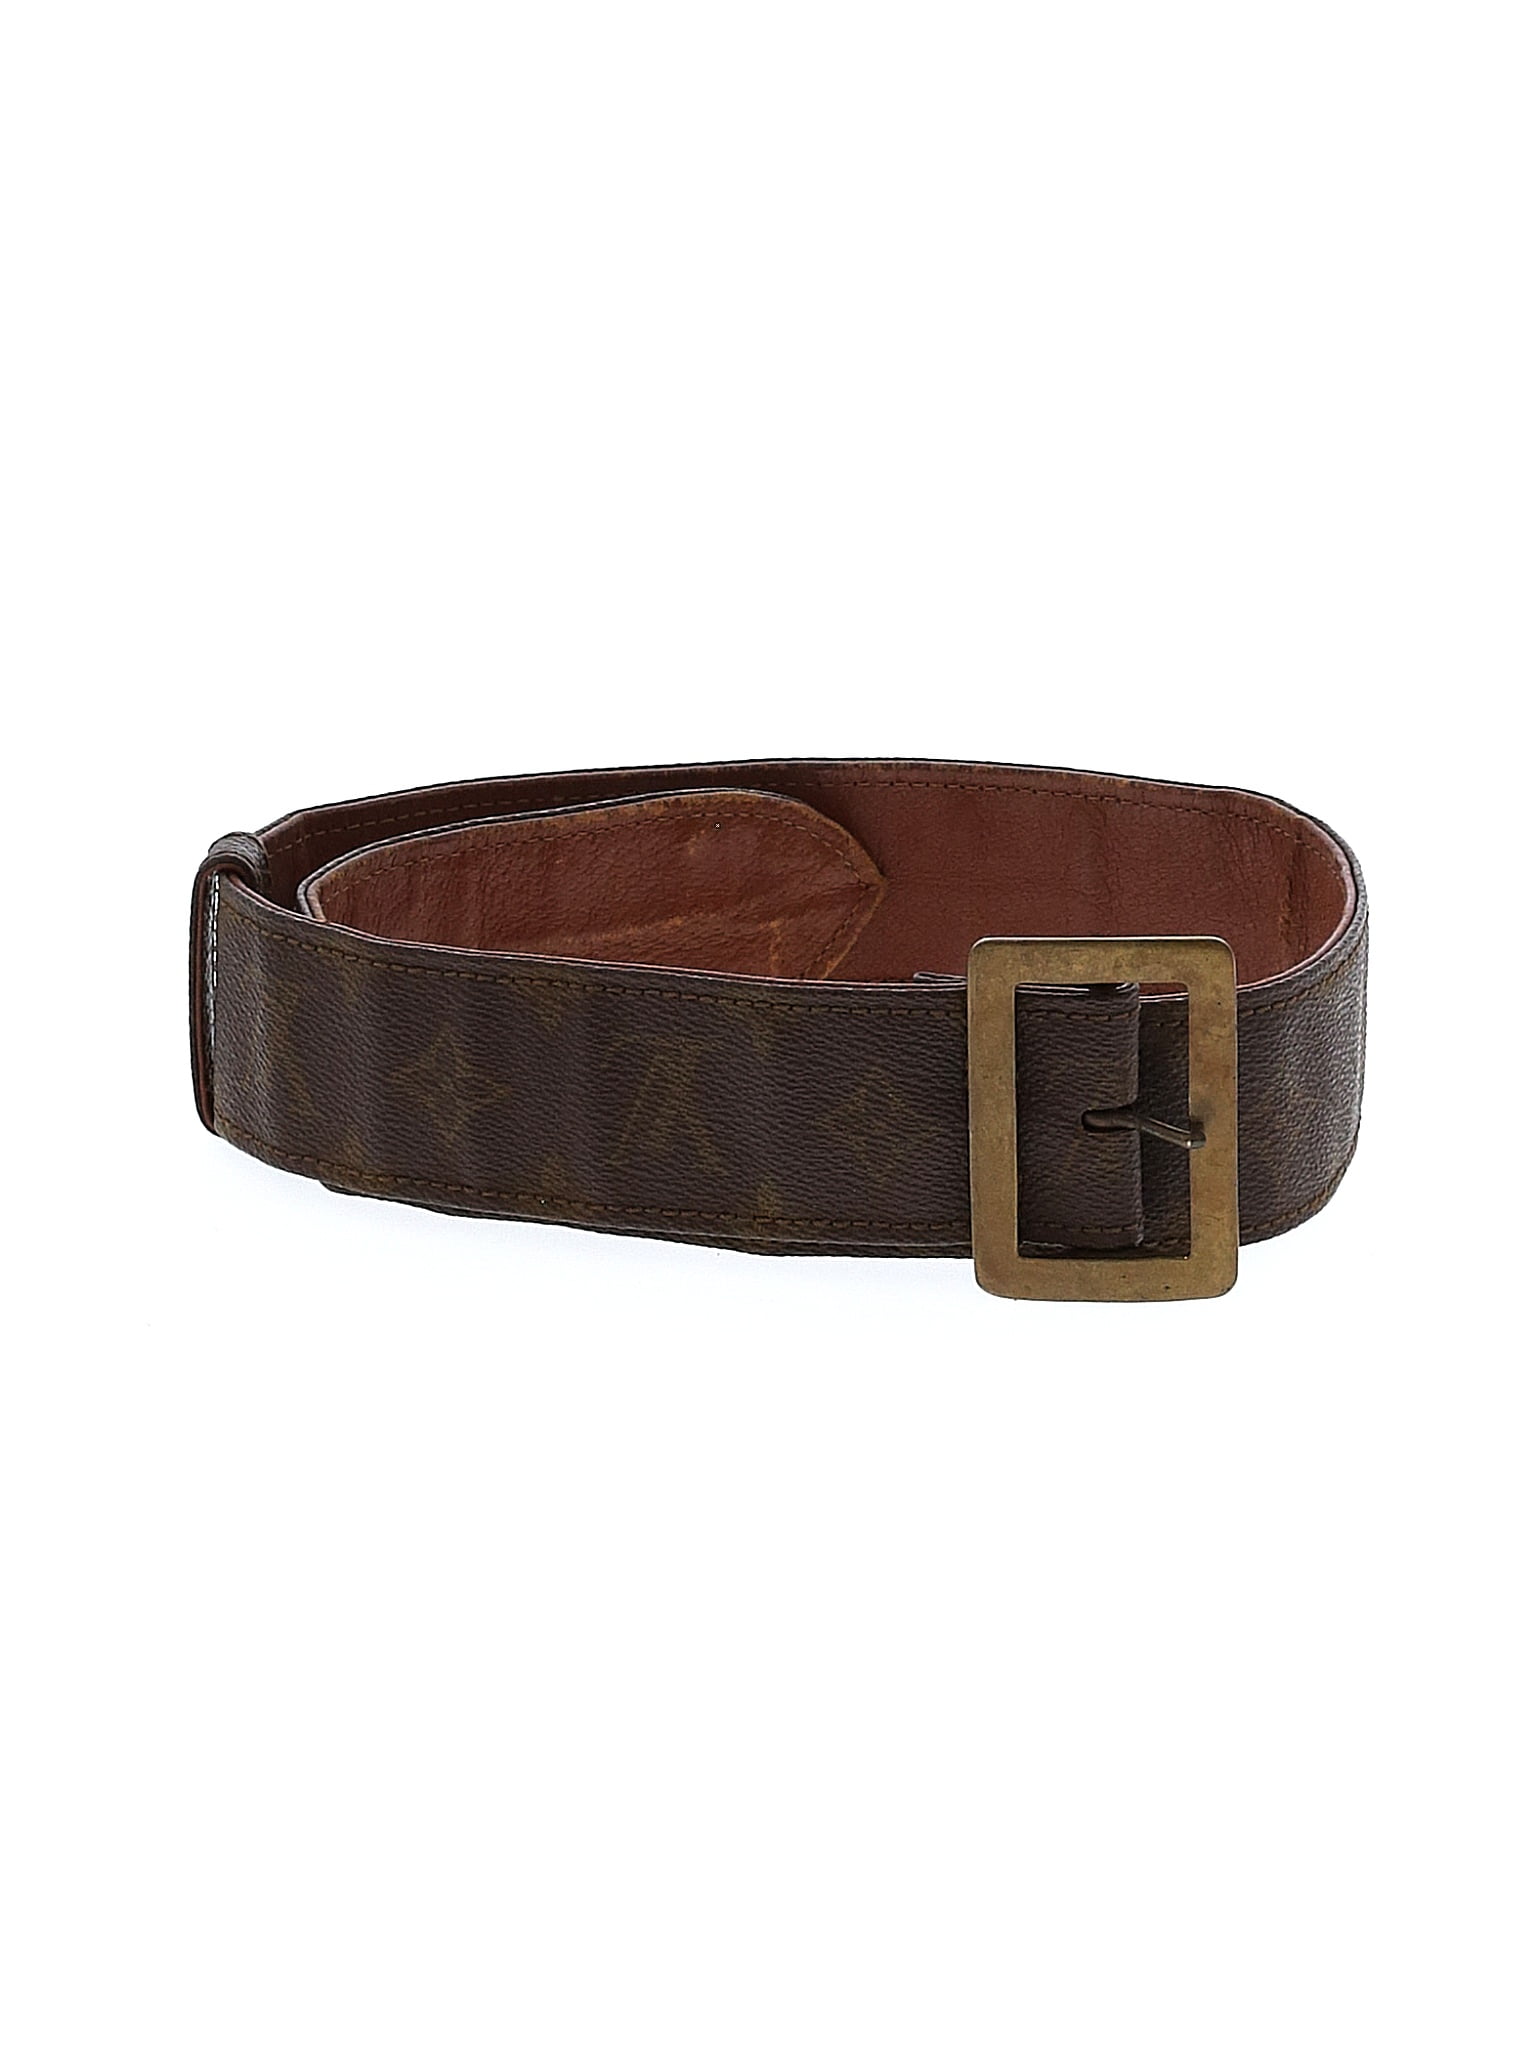 Louis Vuitton Belts On Sale Up To 90% Off Retail